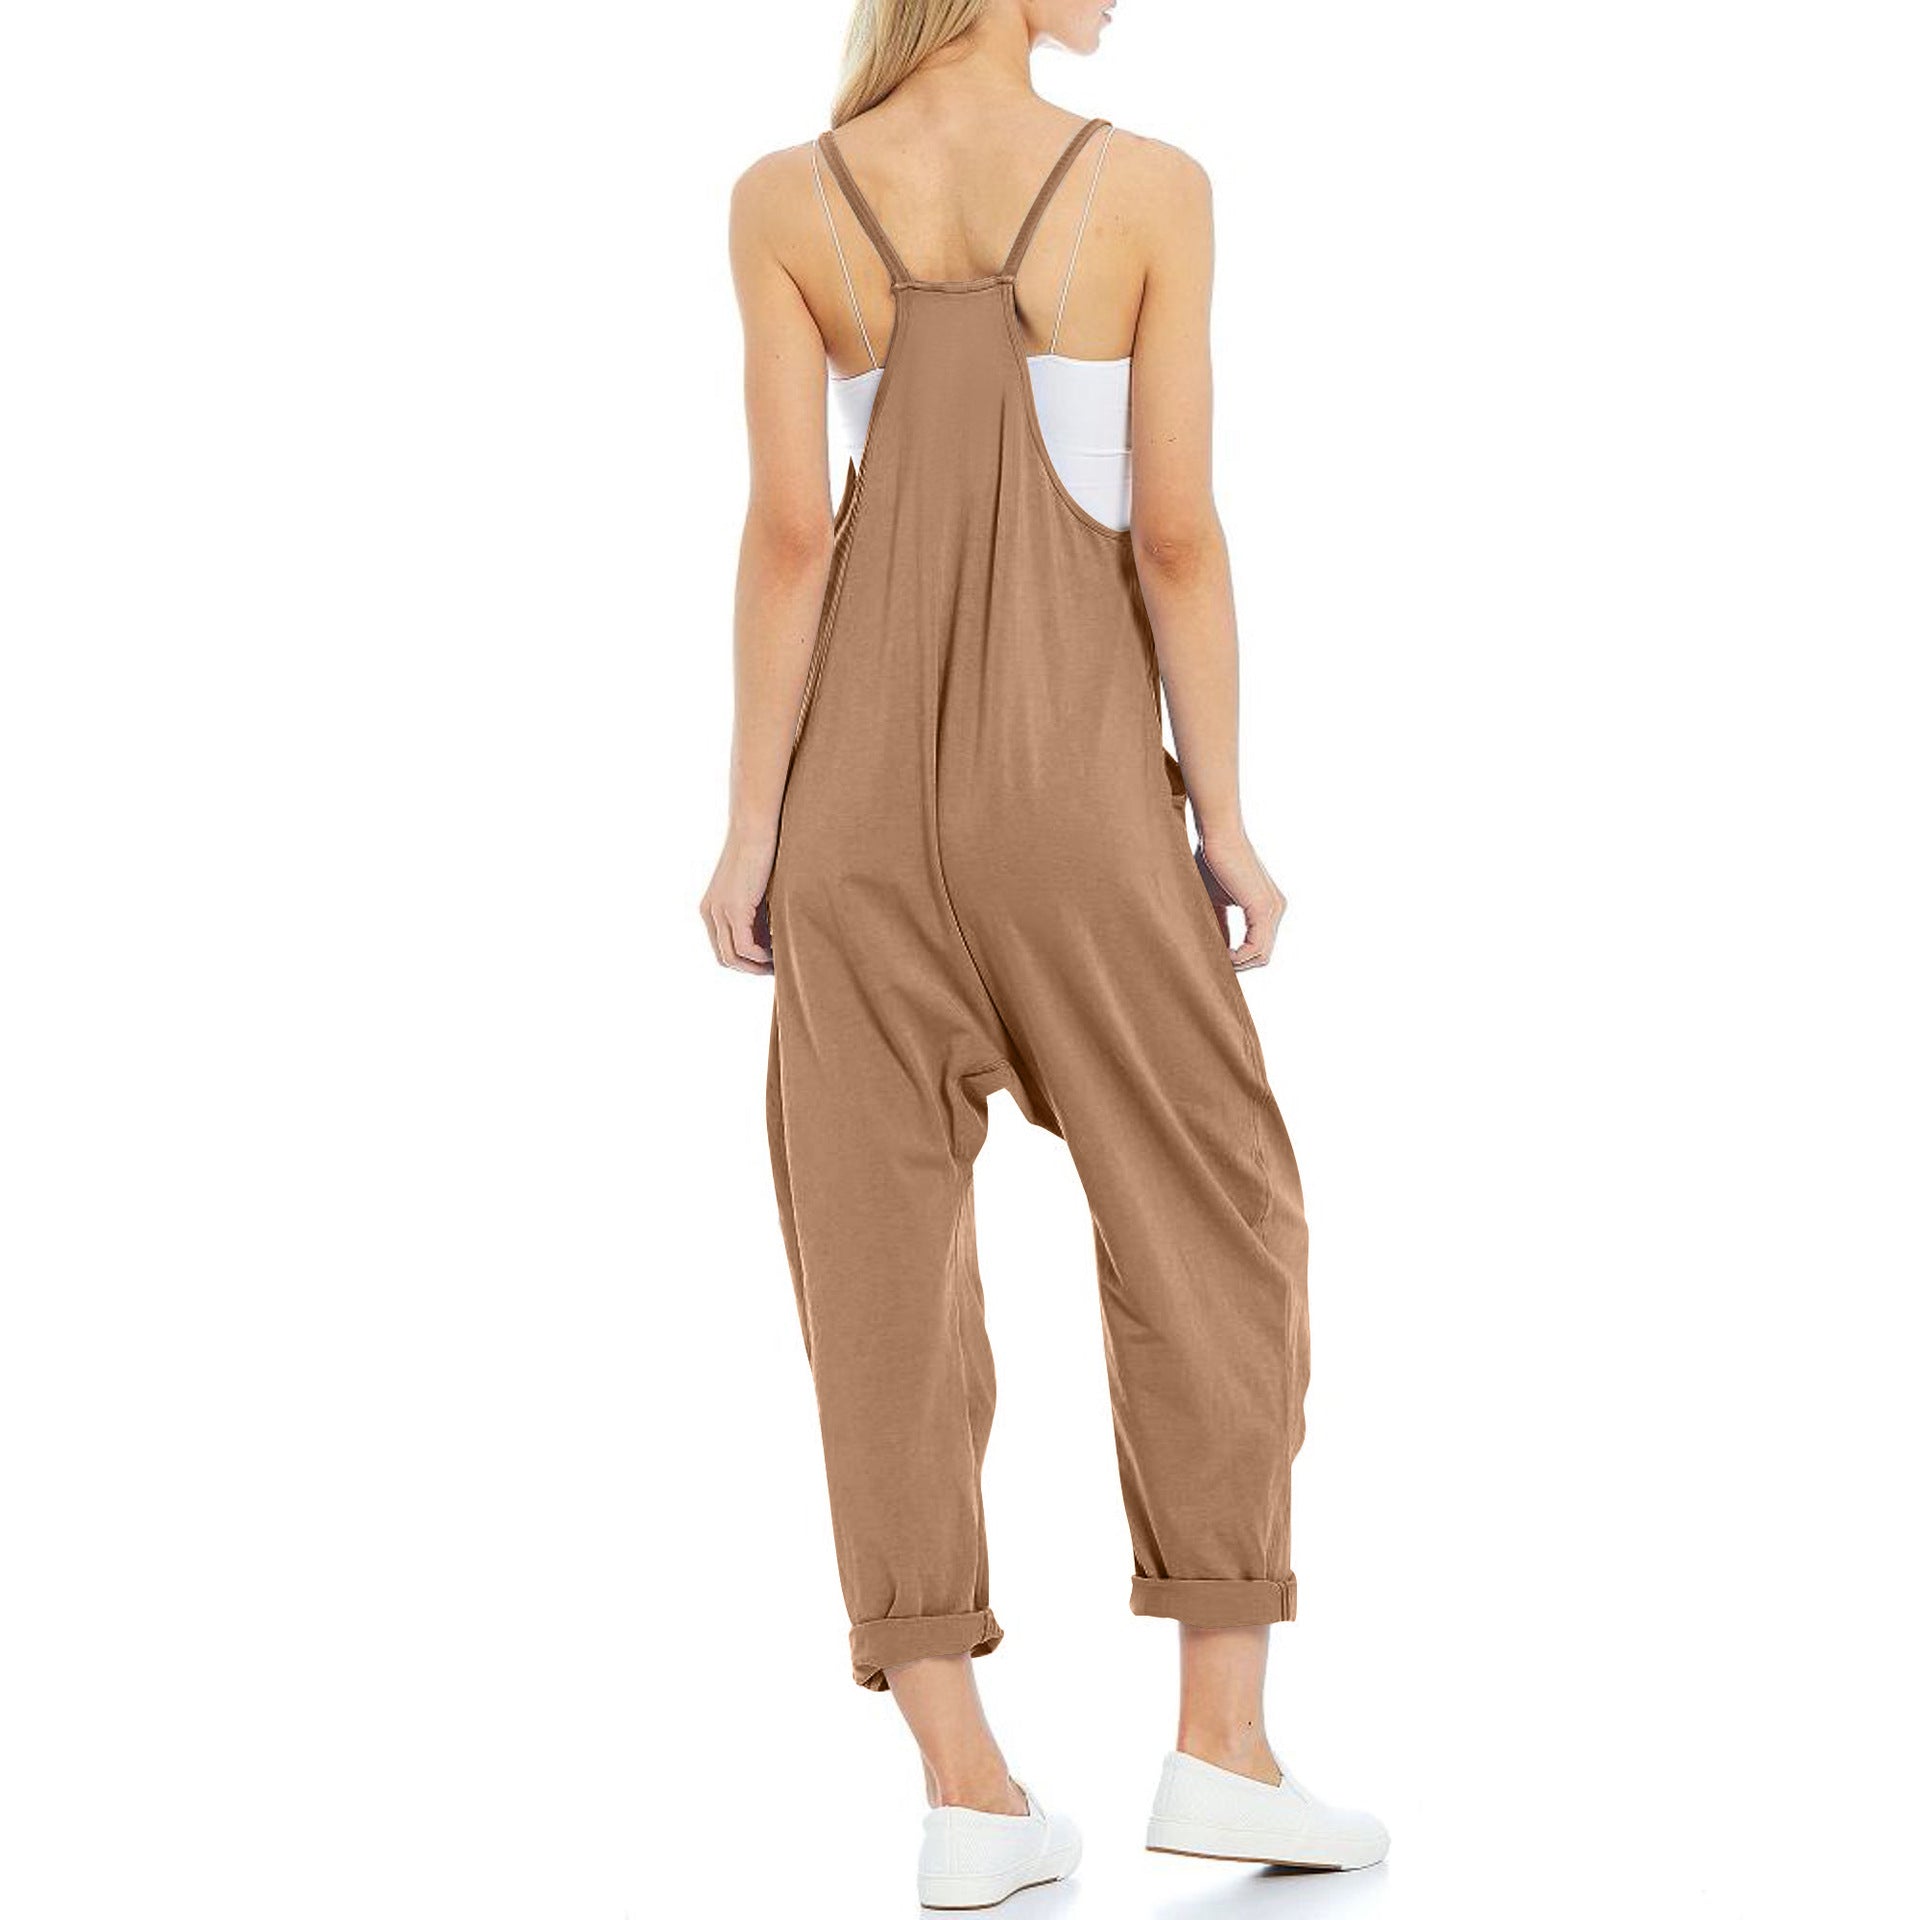 Women's Pocket Spaghetti Straps Knitted One-piece Trousers Jumpsuits